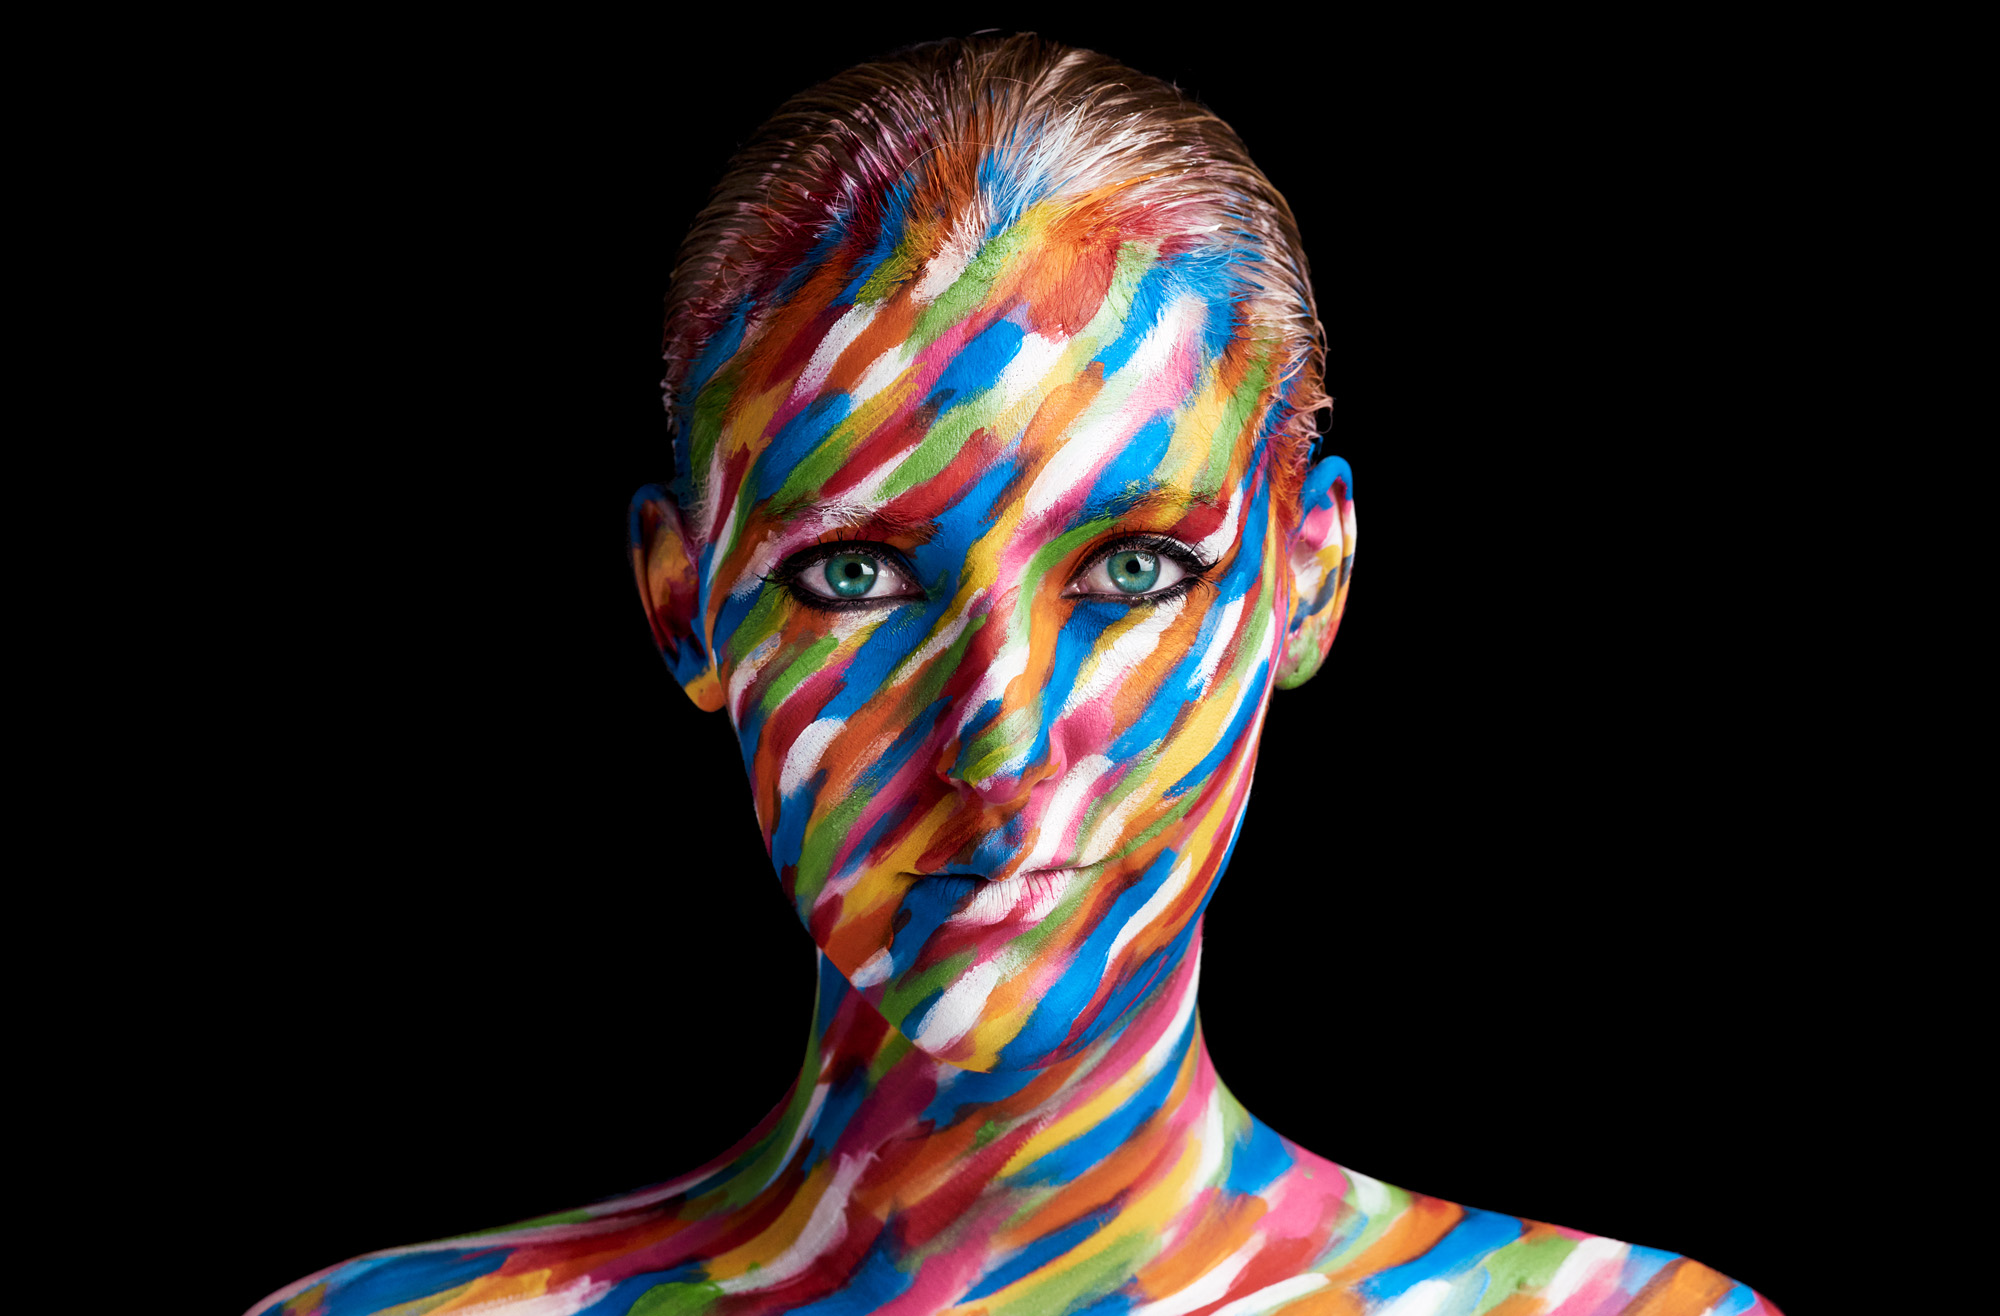 Female face painted in smudges of different color